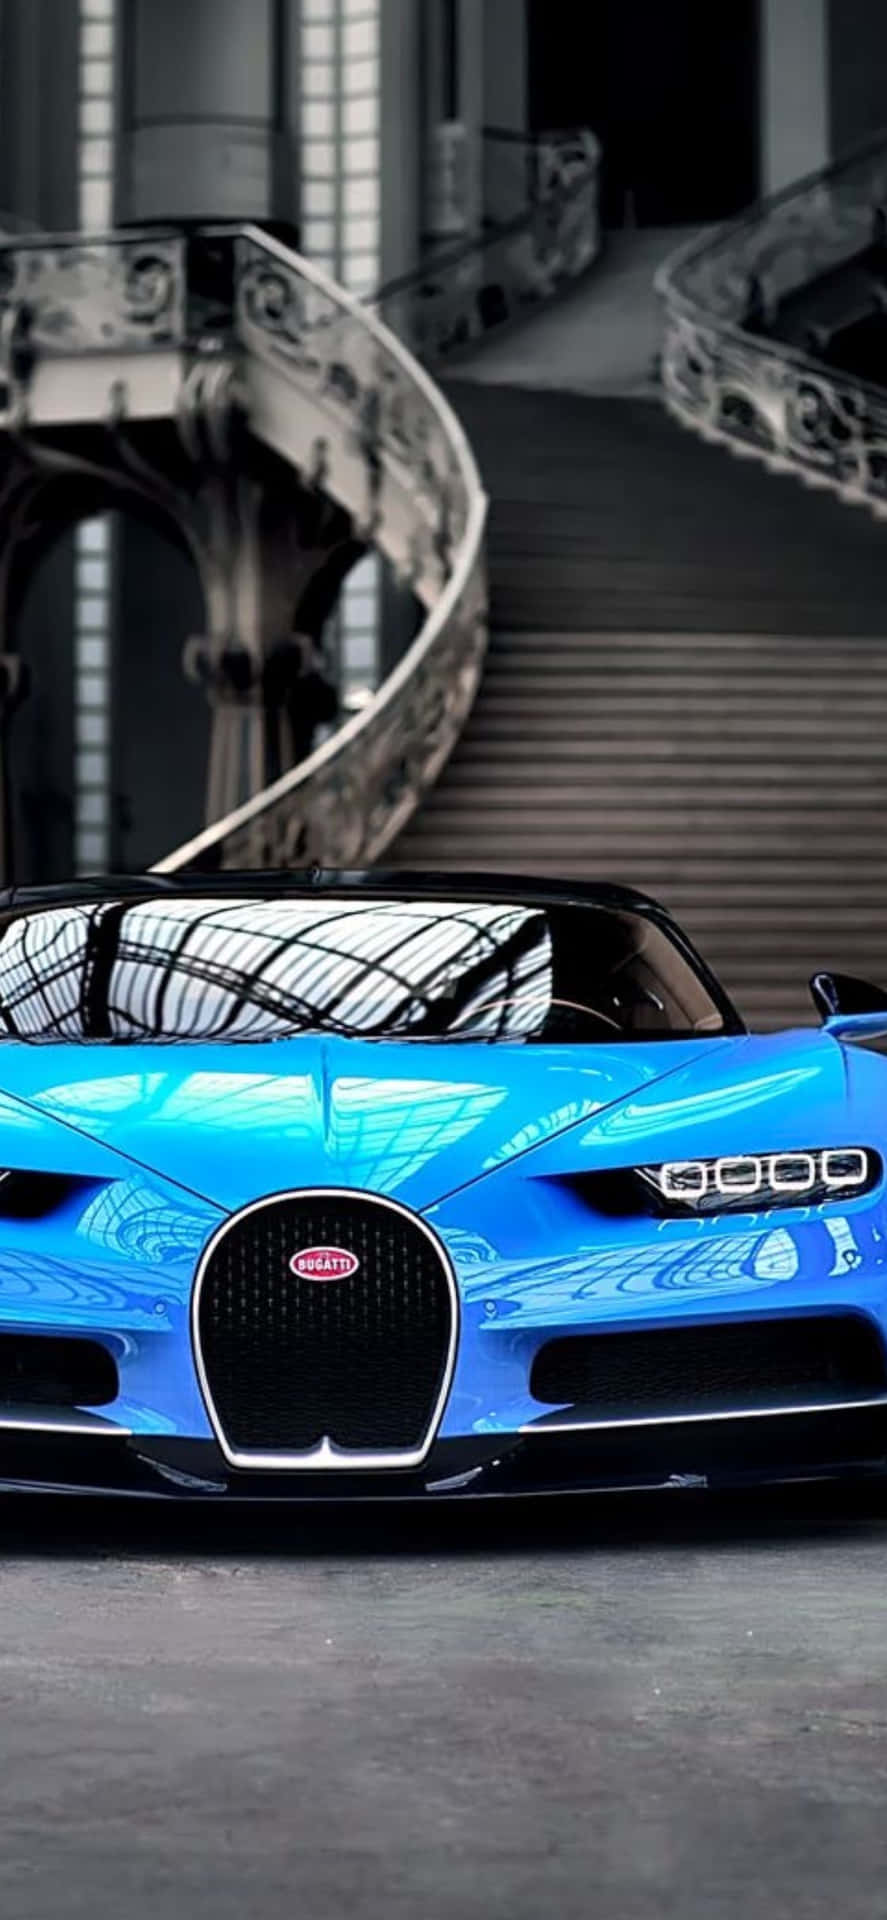 "Own the latest Iphone XS with this sleek and sophisticated Bugatti design background."